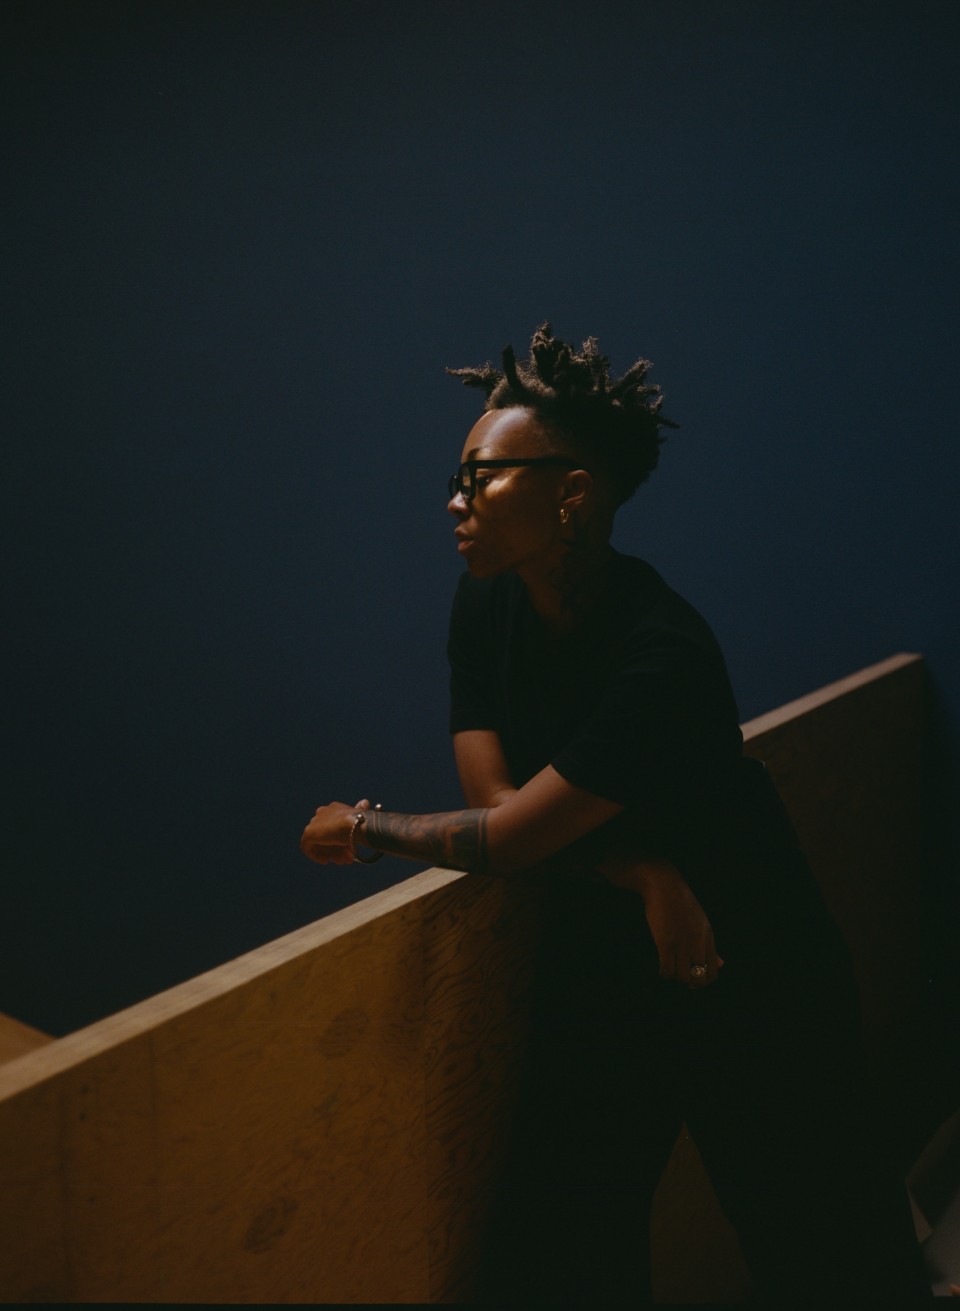 A portrait of Kya Lou, a Black person, who looks down over a bannister which they are leaning on (wearing a black short-sleeved shirt). They also wear black framed glasses and behind them is a deep blue-colored wall.